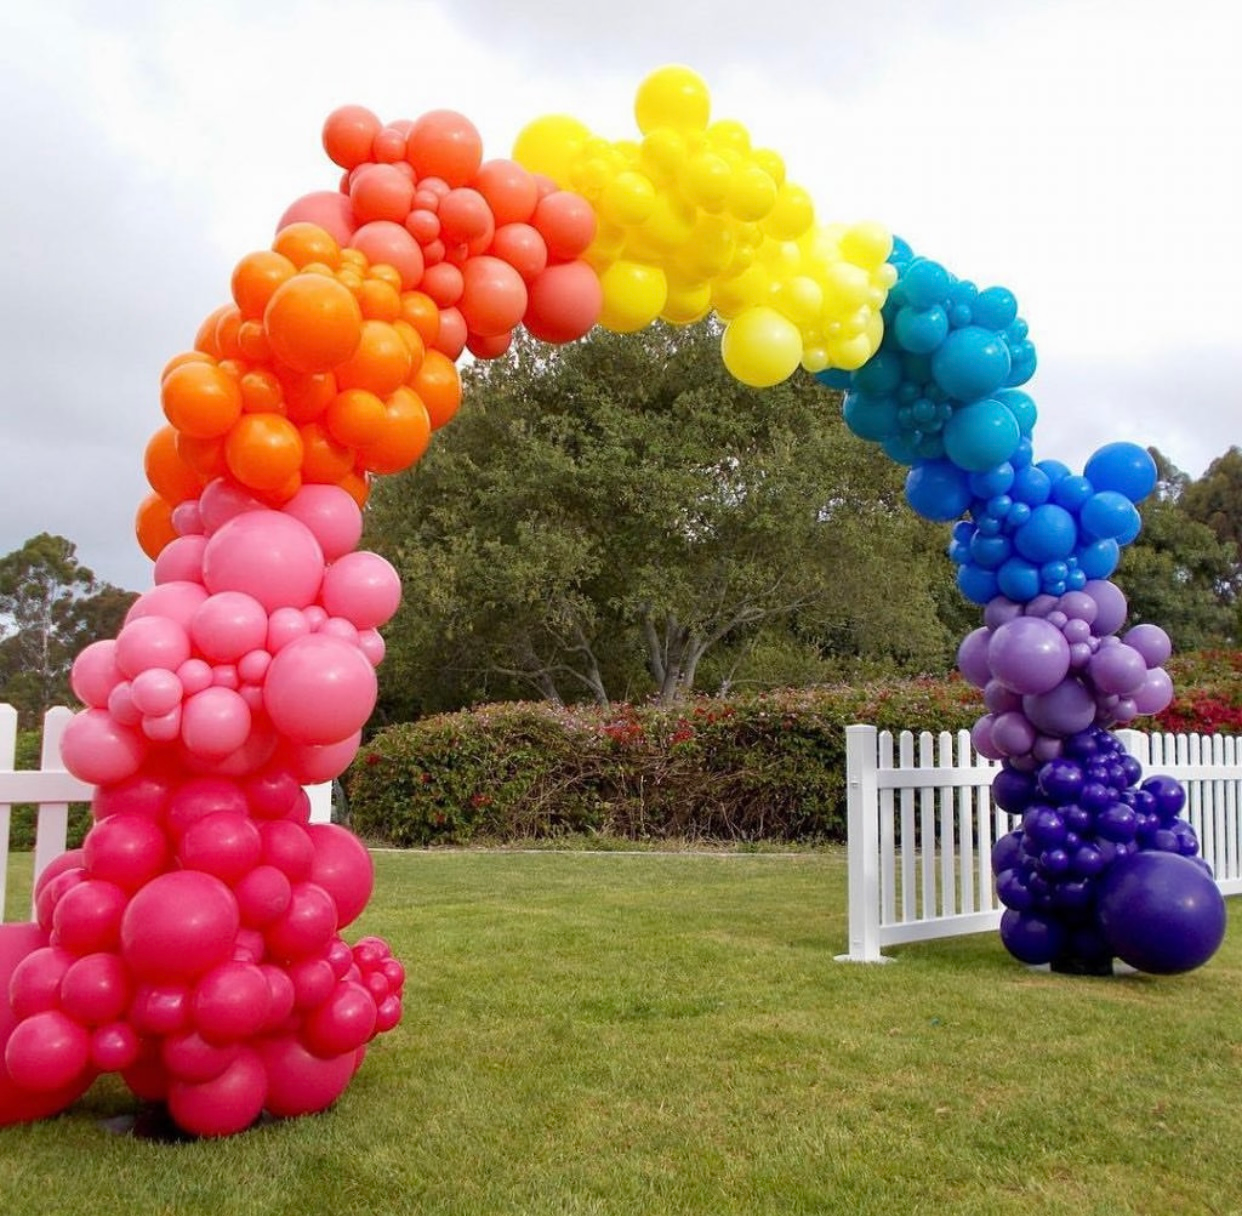 A bunch of colorful balloons in the shape of a rainbow